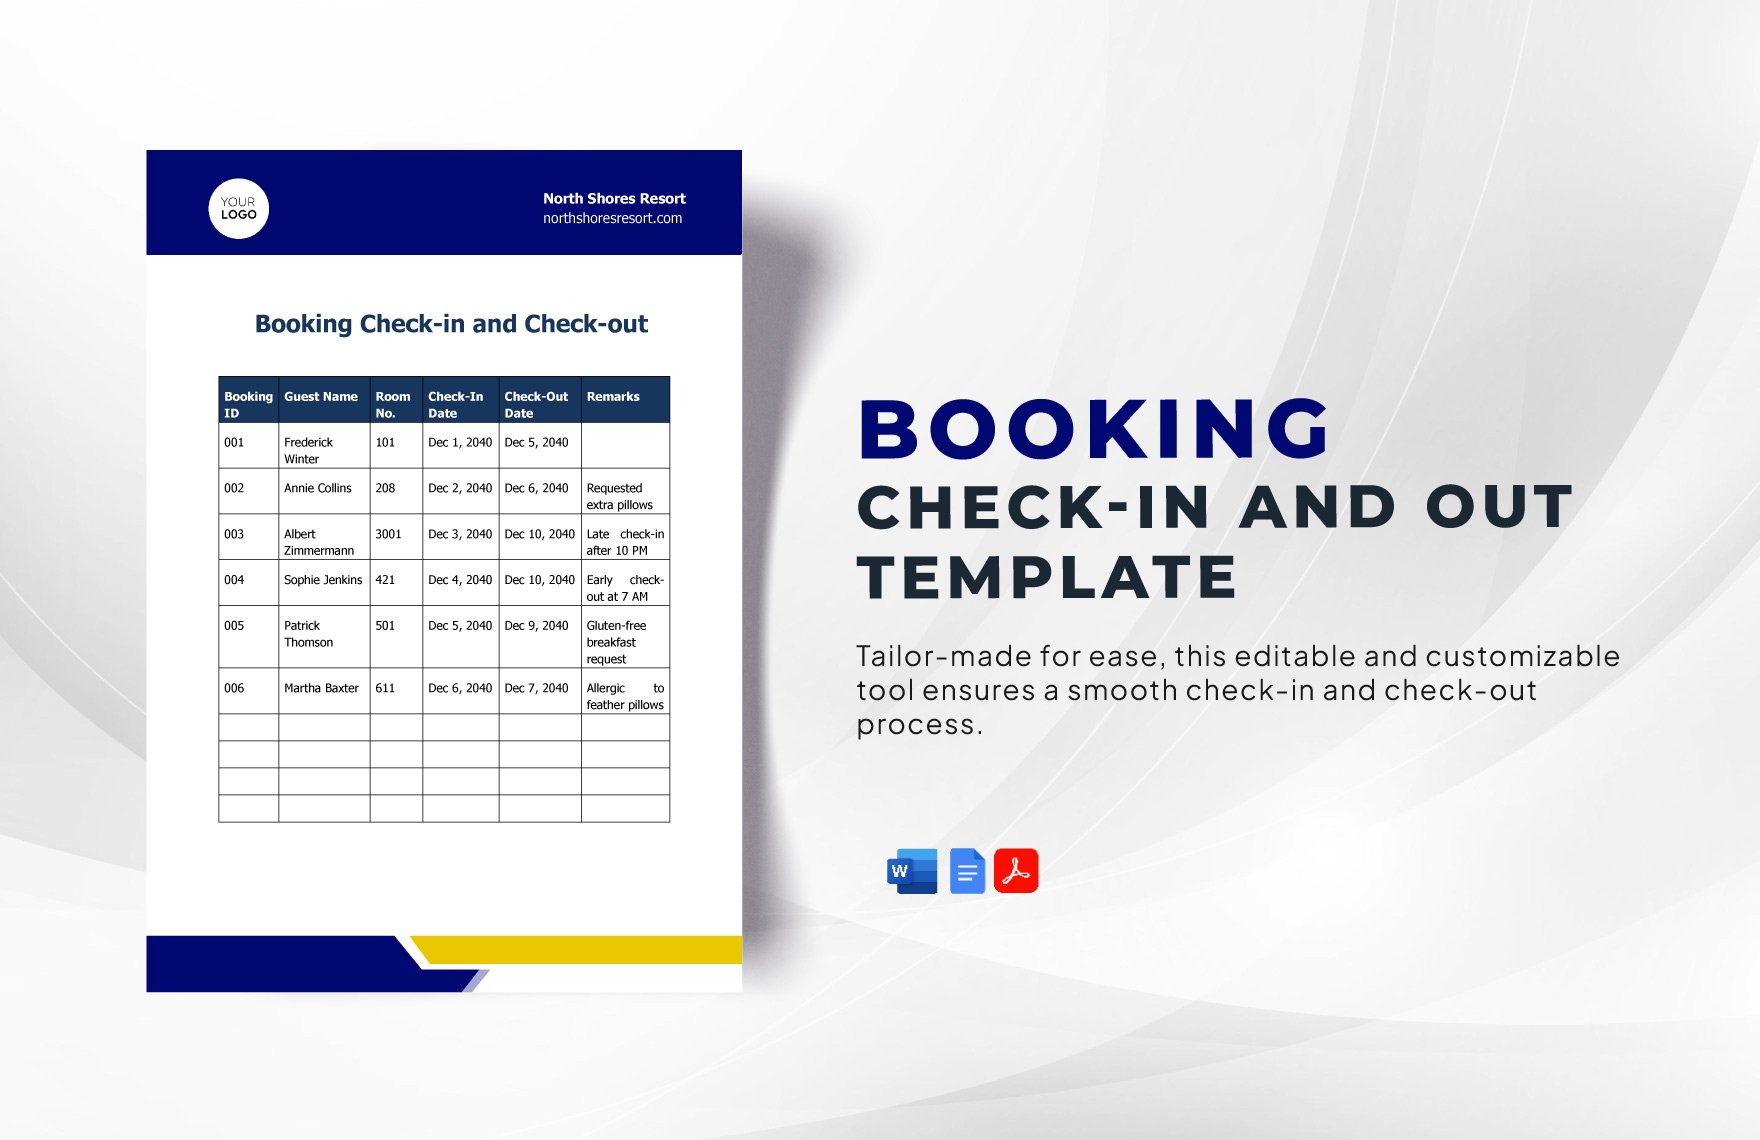 Booking Check-in and Out Template